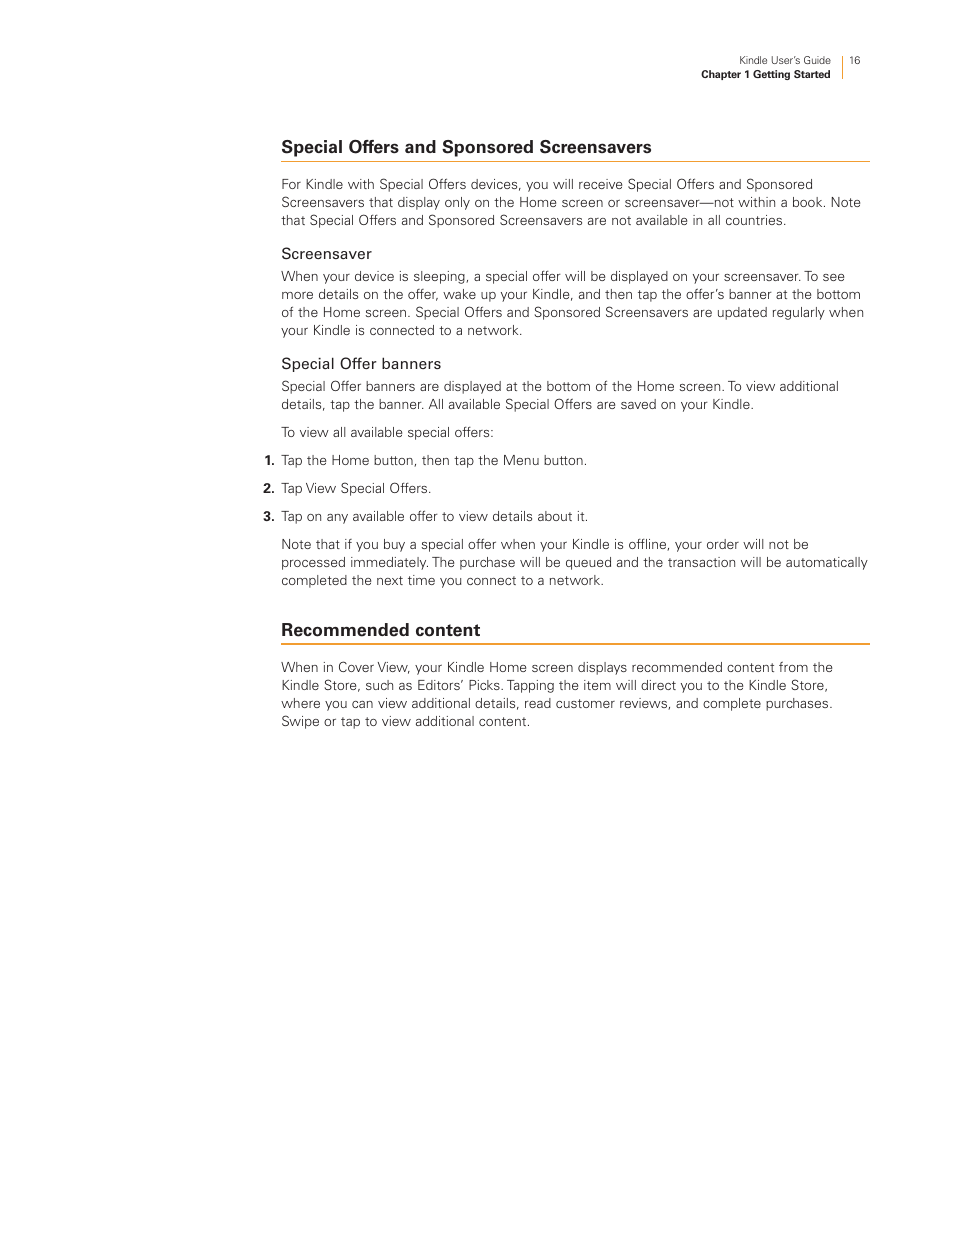 Recommended content, Special offers and sponsored screensavers | Kindle Touch 3G User Manual | Page 16 / 36